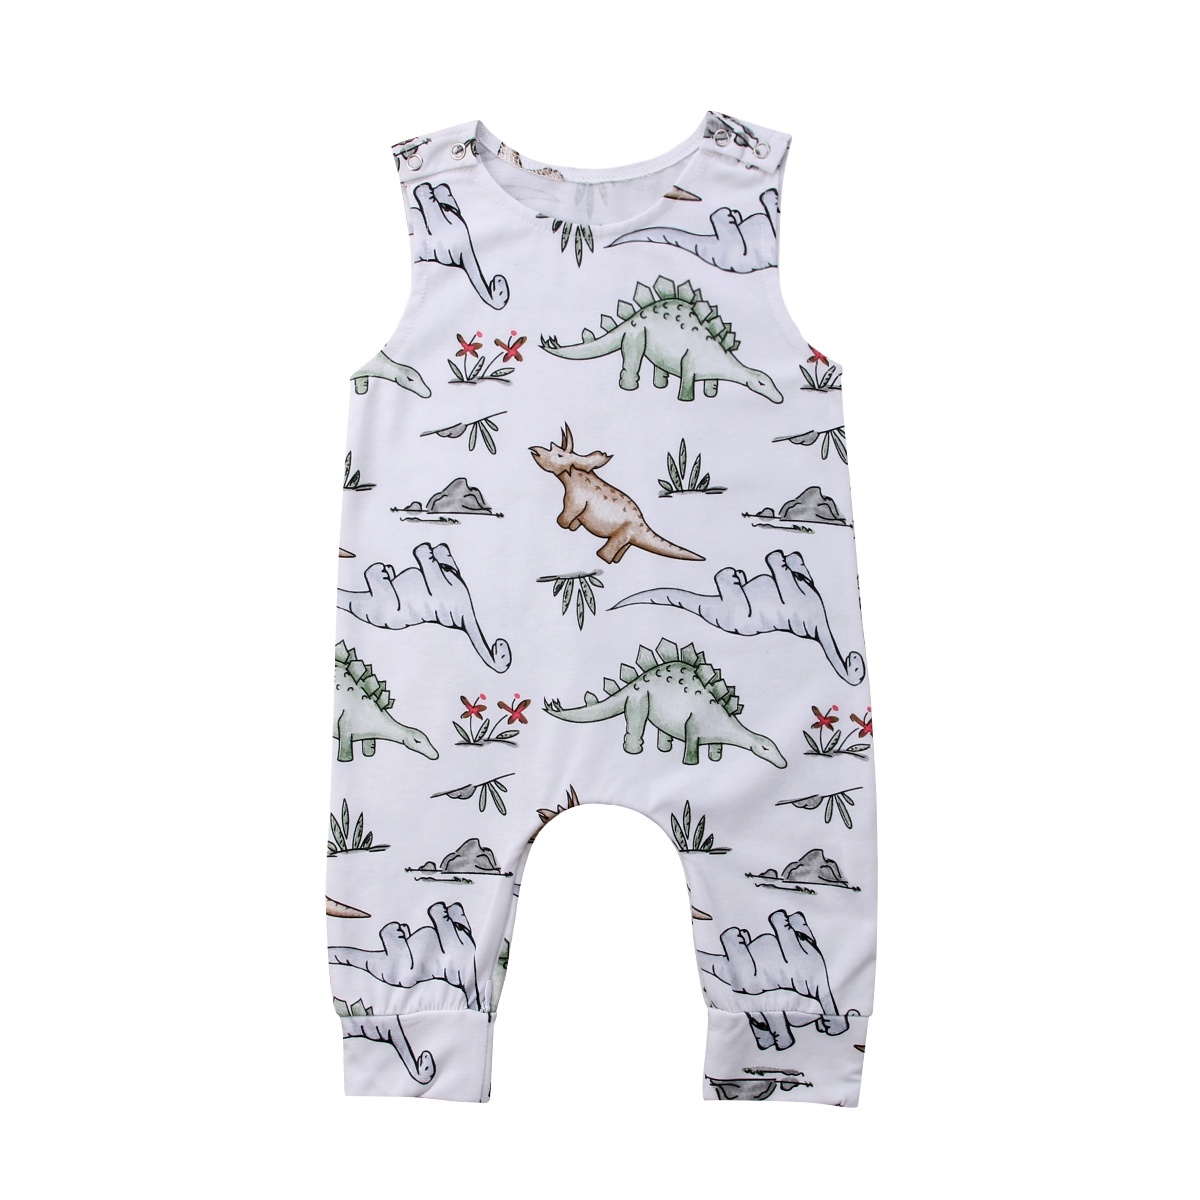 YOUNGER TREE Infant Toddler Baby Boys Summer Romper Dinosaur Sleeveless Jumpsuit One Piece Bathing Suit